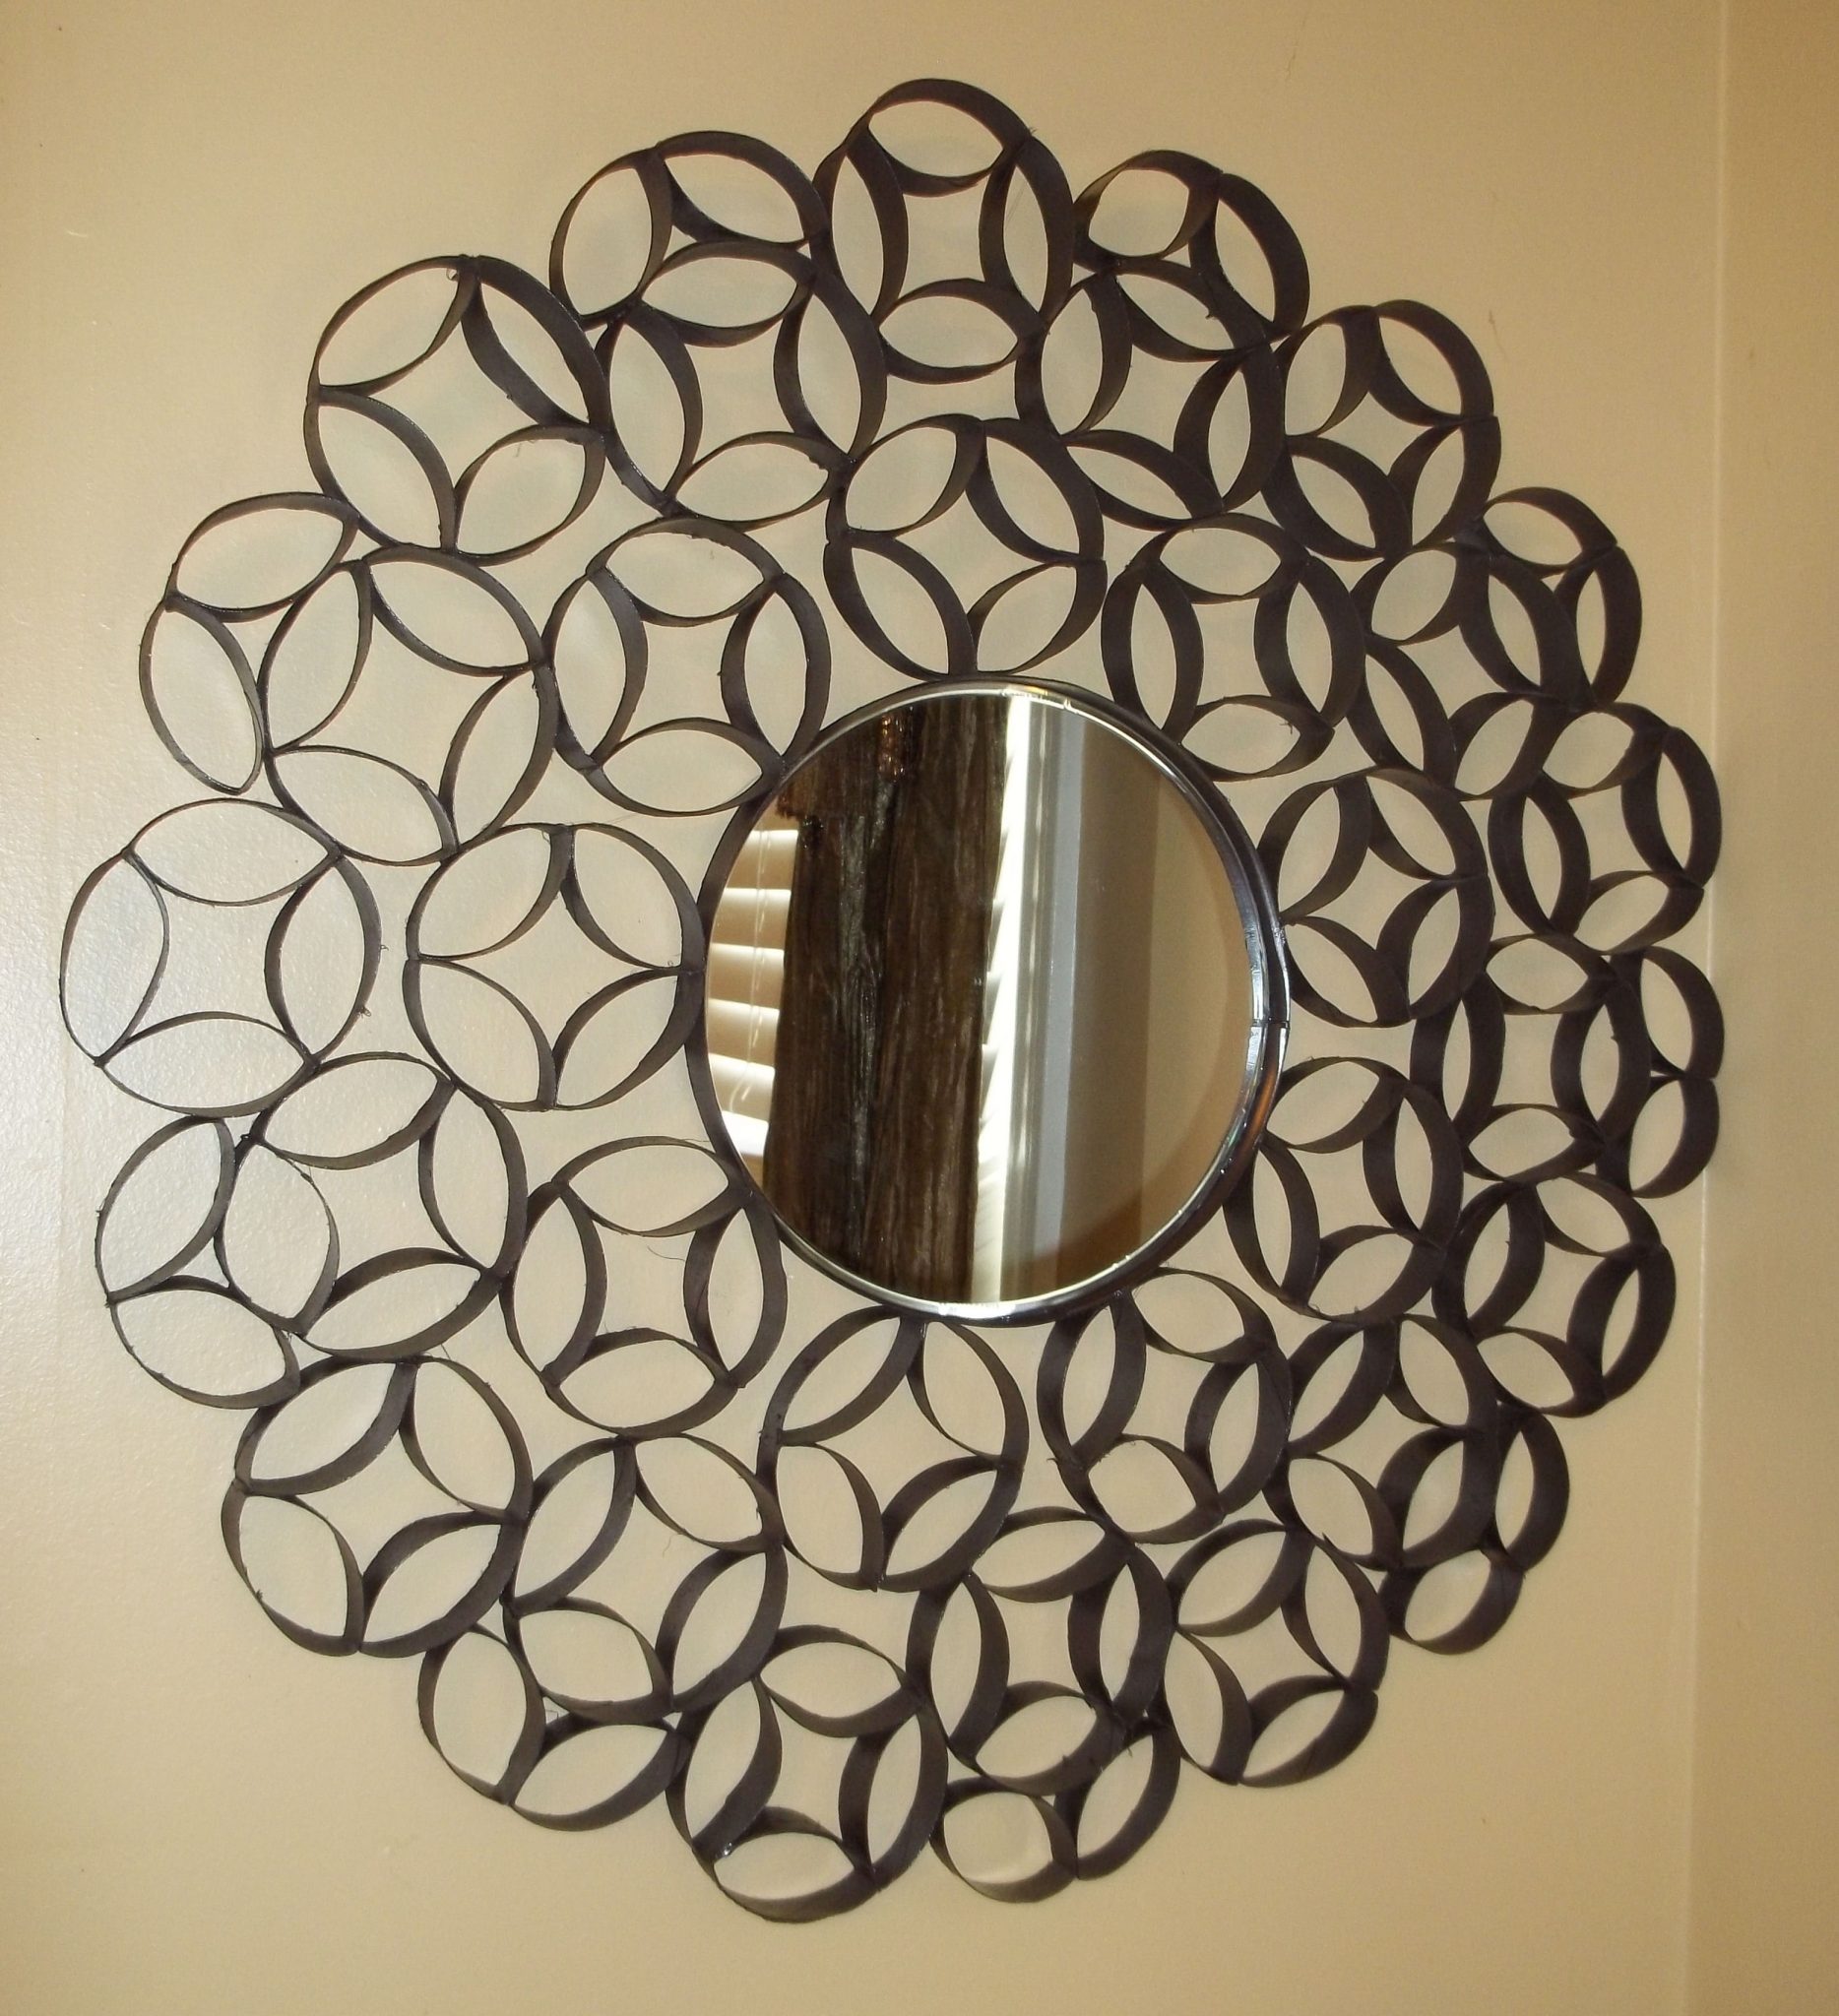 Toilet paper roll wall crafts 4.jpg